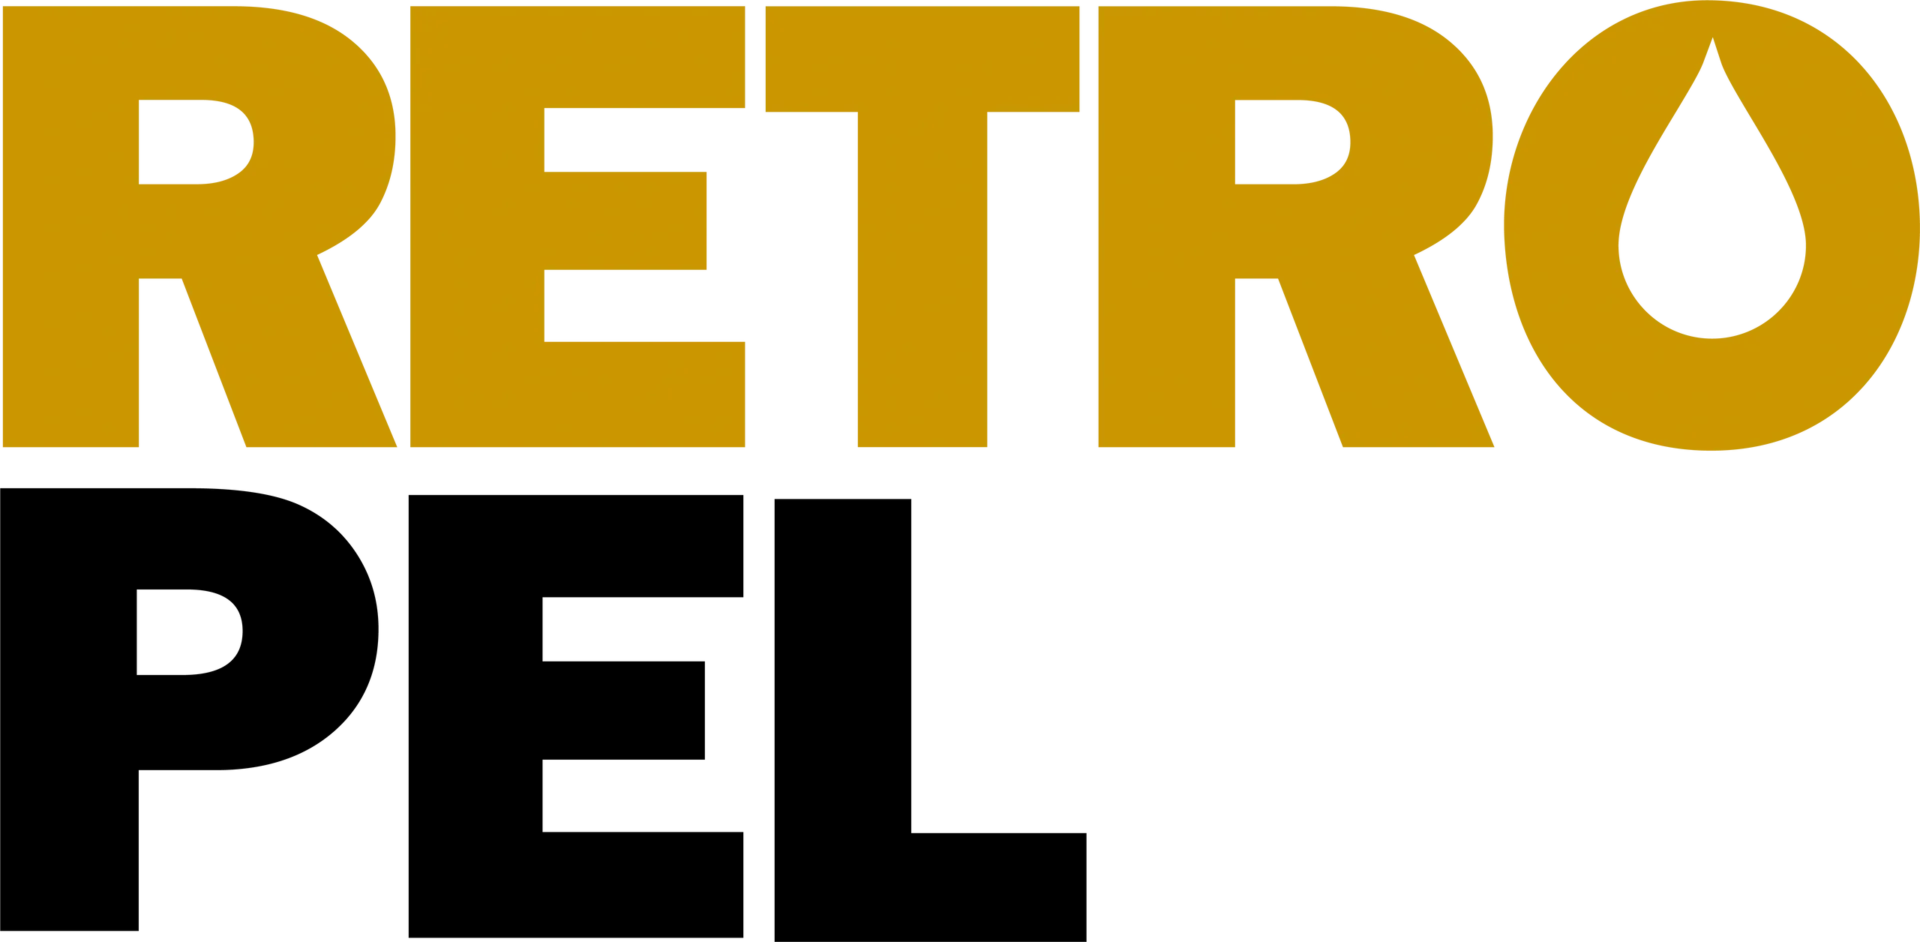 A yellow and black background with the word " eir ".